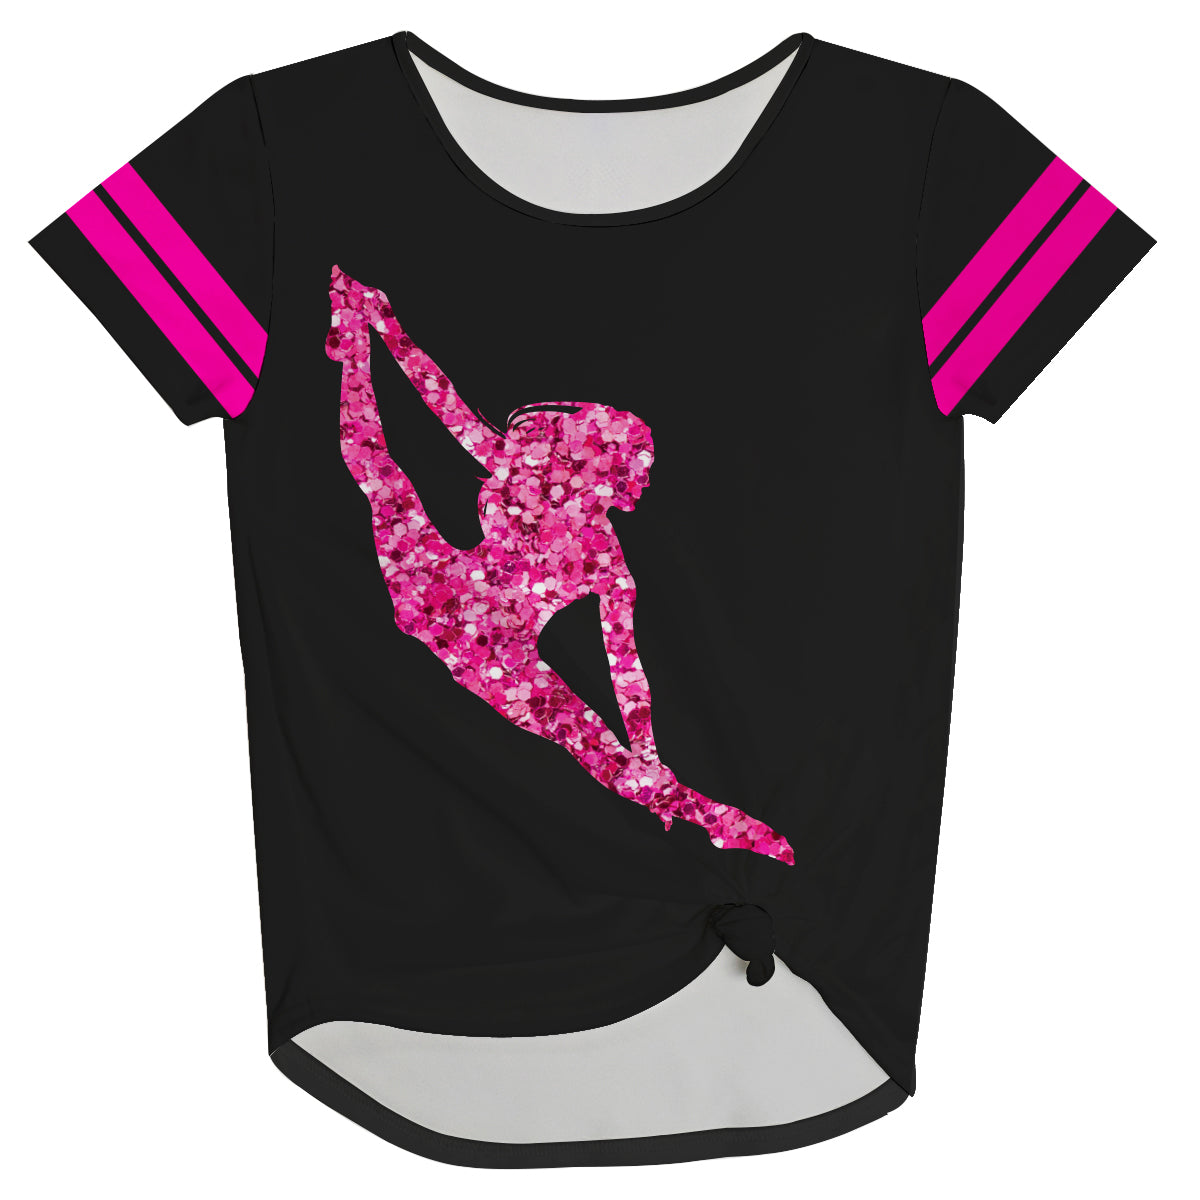 Black and hot pink dancer knot top with name - Wimziy&Co.